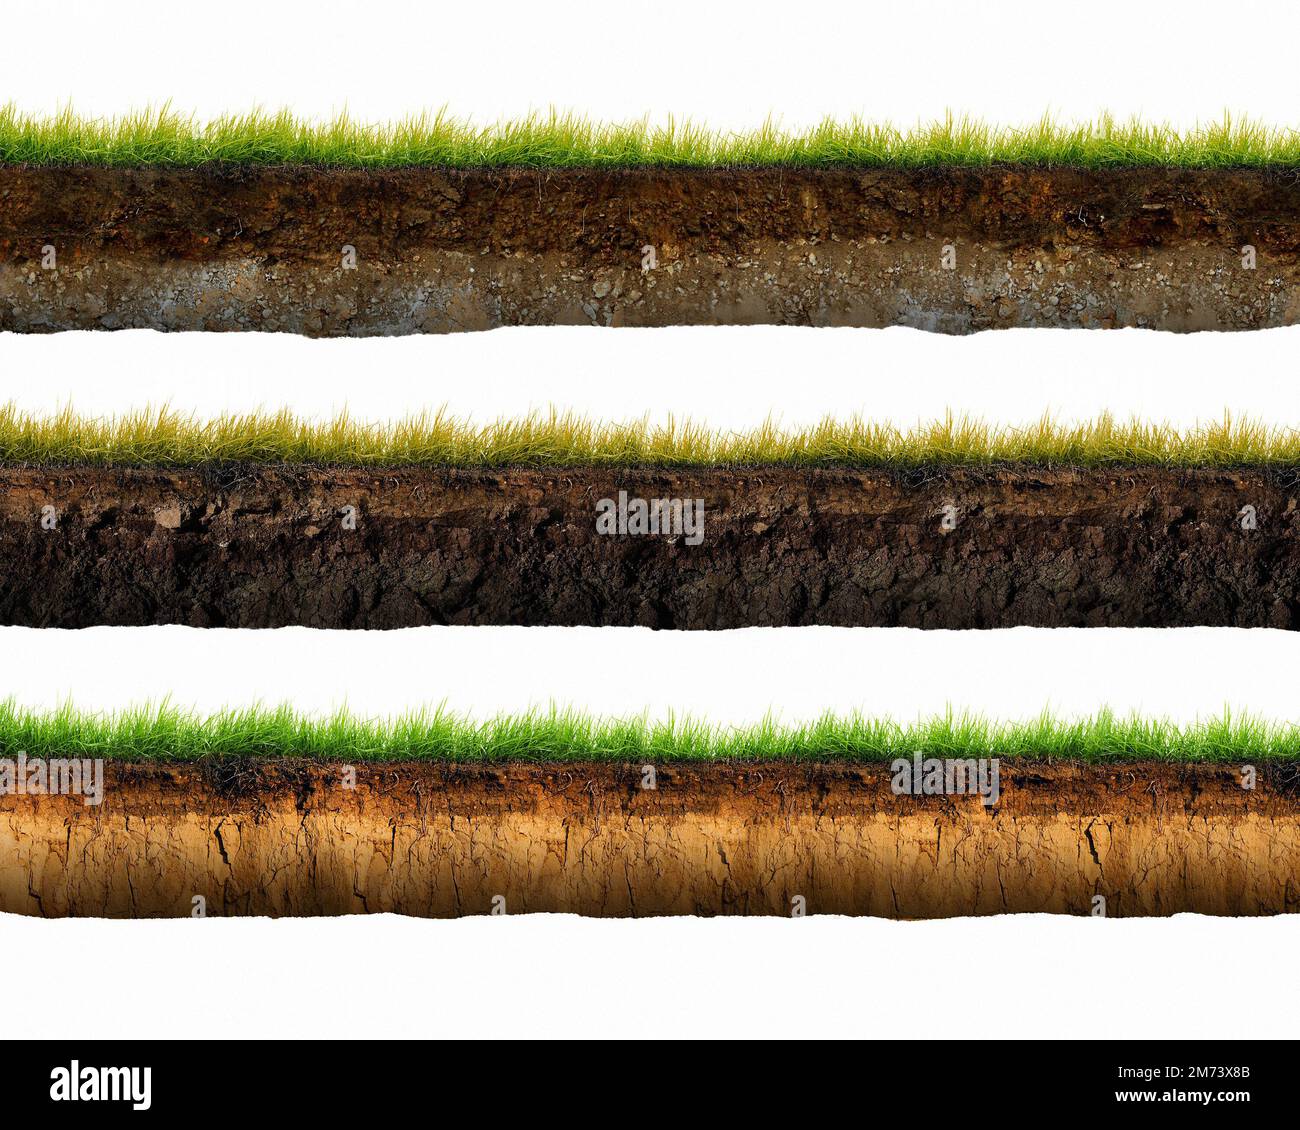 Three soil cut and grass isolated. 3d illustration, Cross section brown soil and green grass Stock Photo